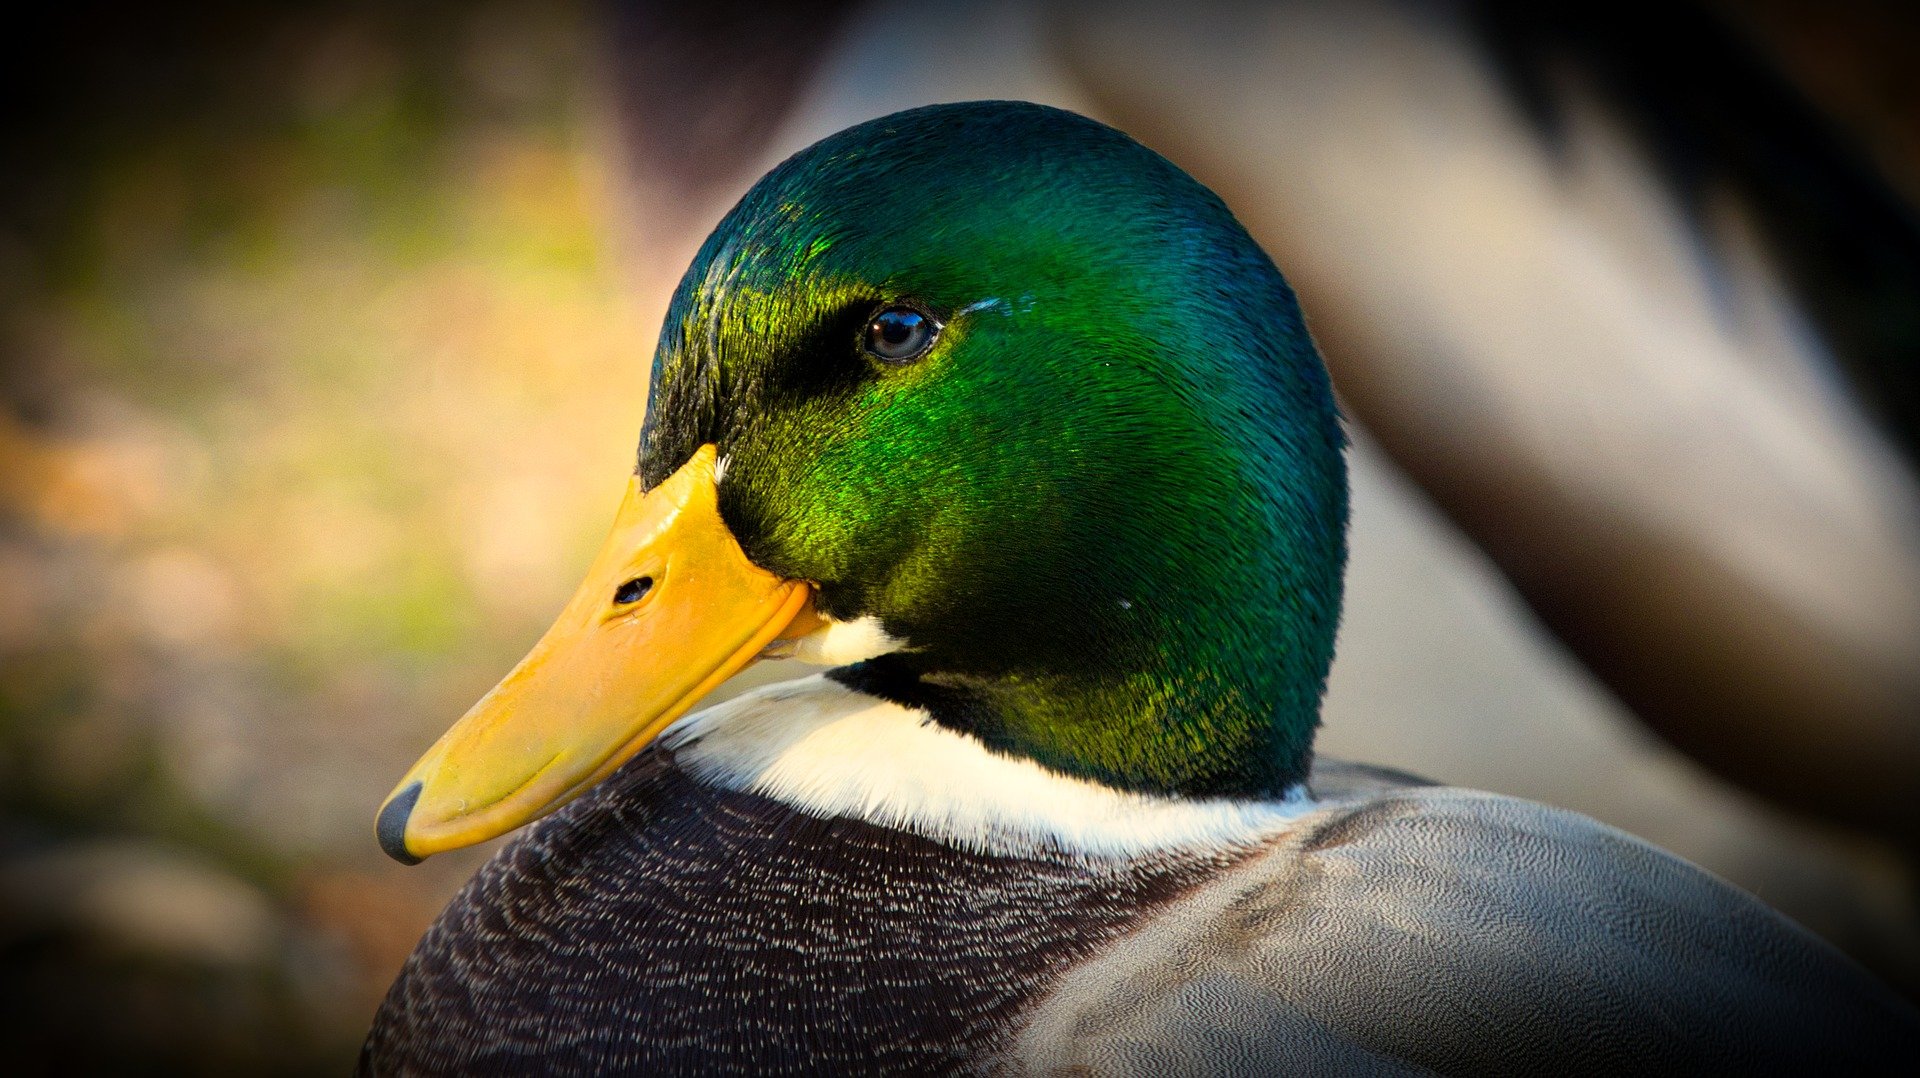 A close up of a duck. | Photo: Pixabay/9883074 